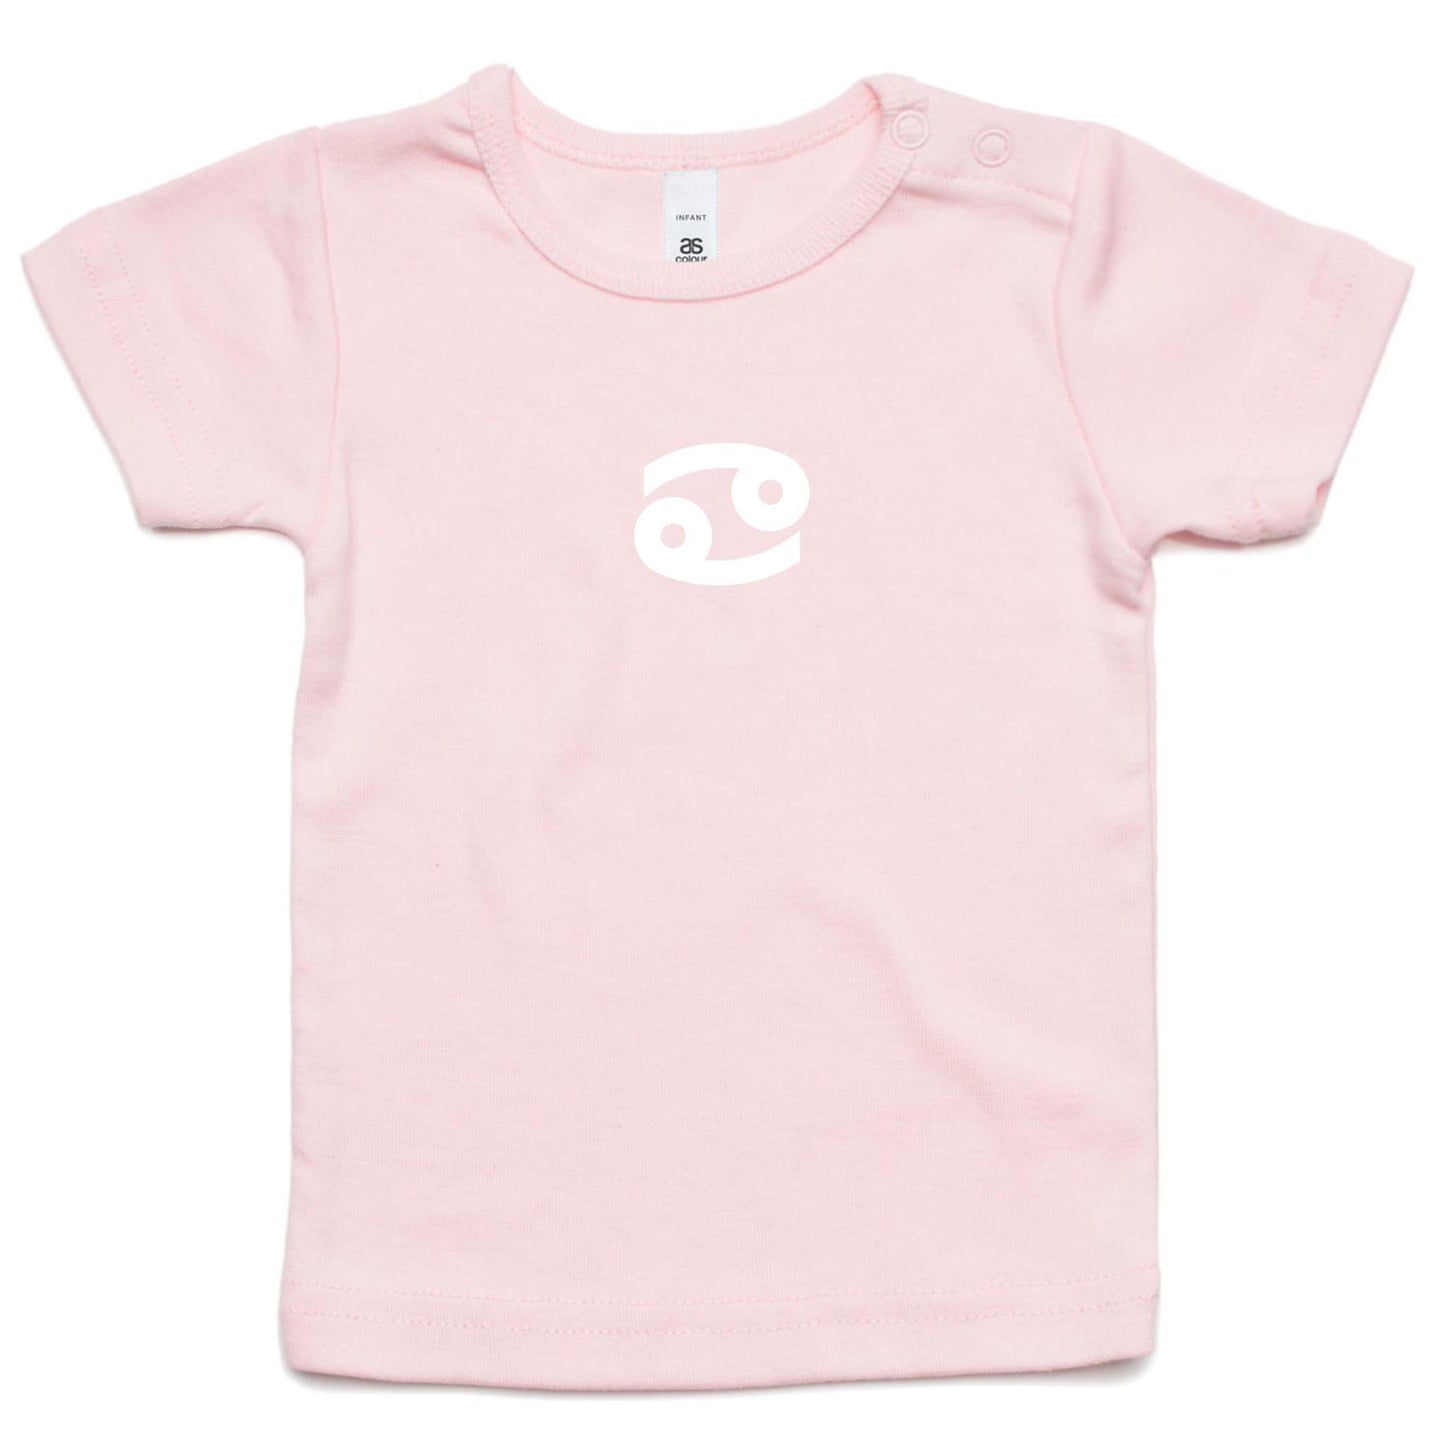 Cancer T Shirts for Babies